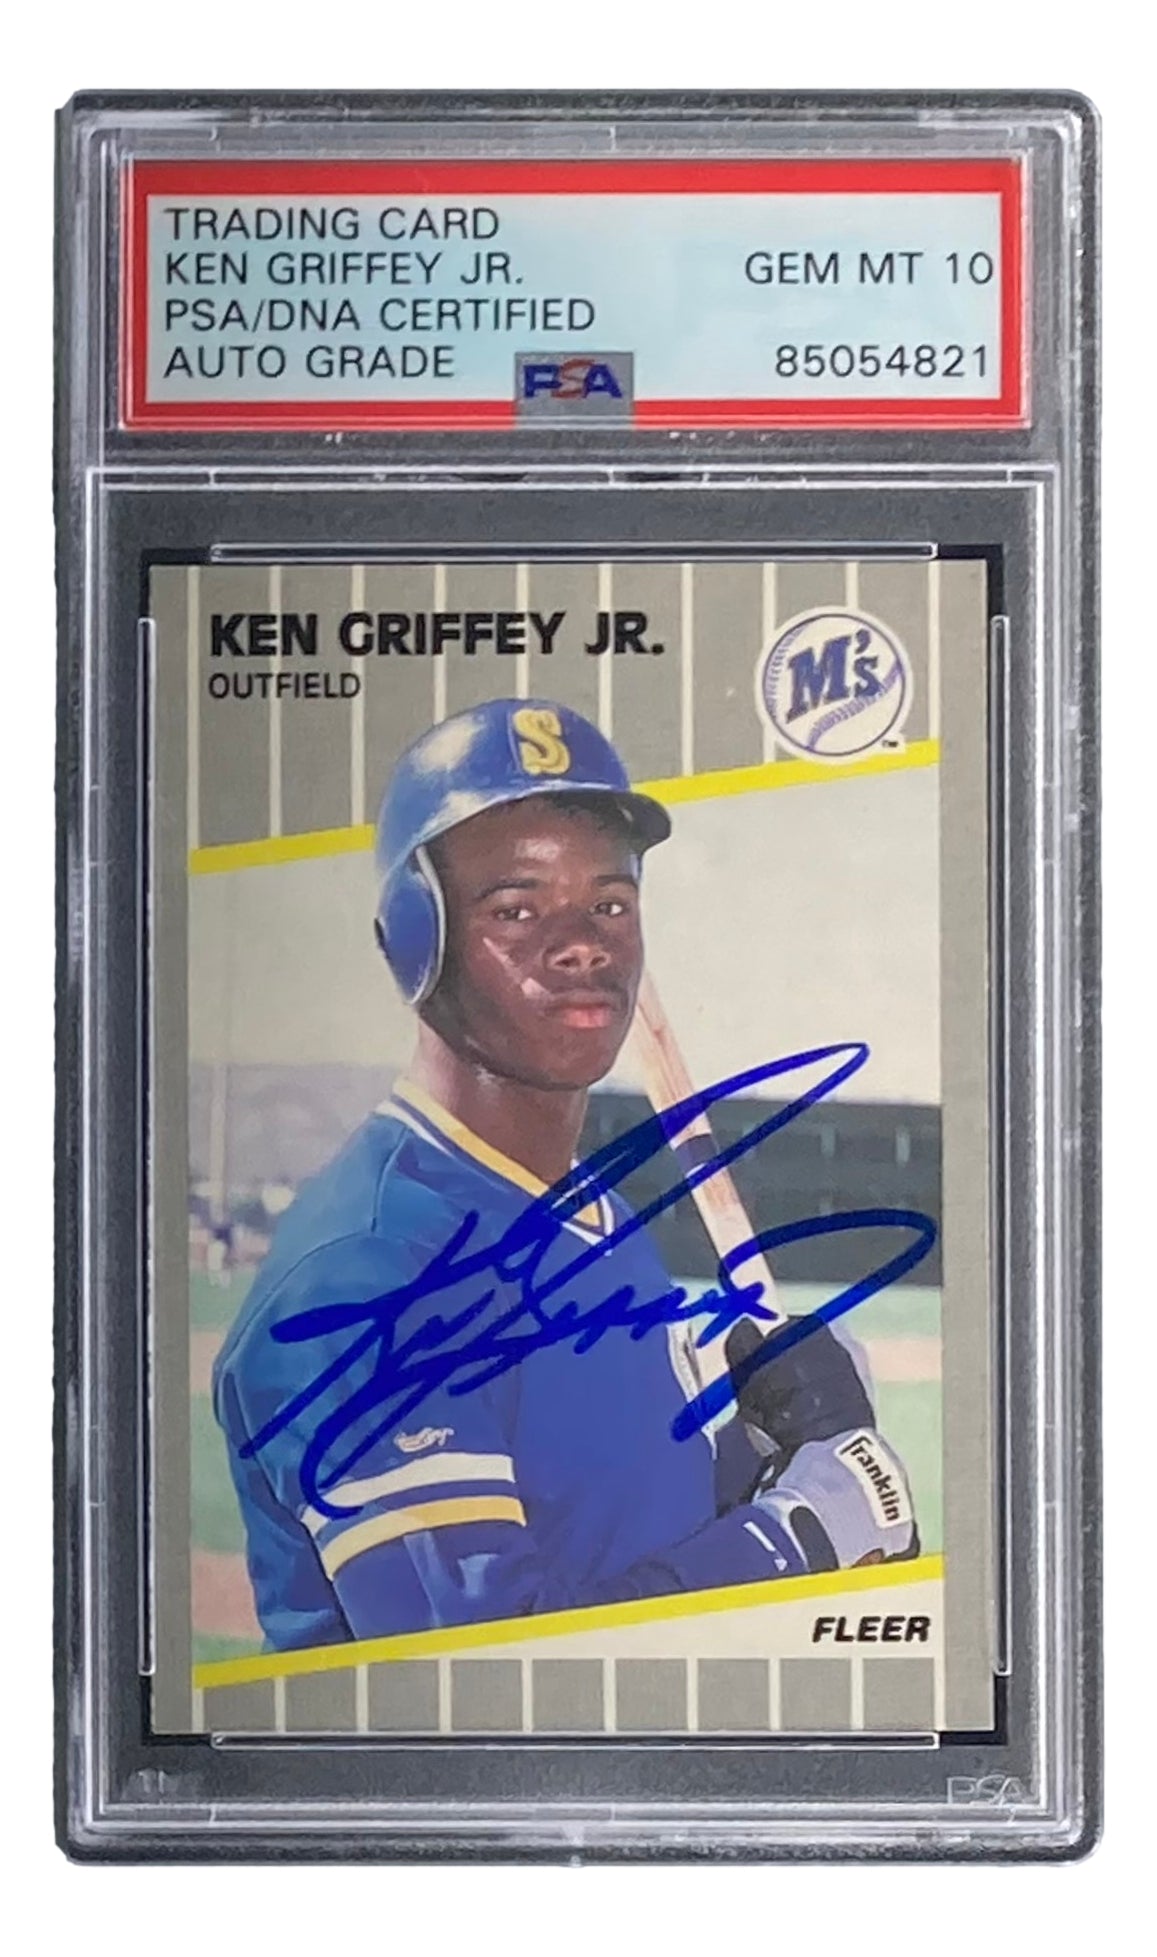 Ken Griffey Sr. Ken Griffey Jr. Design by the Costacos Brothers